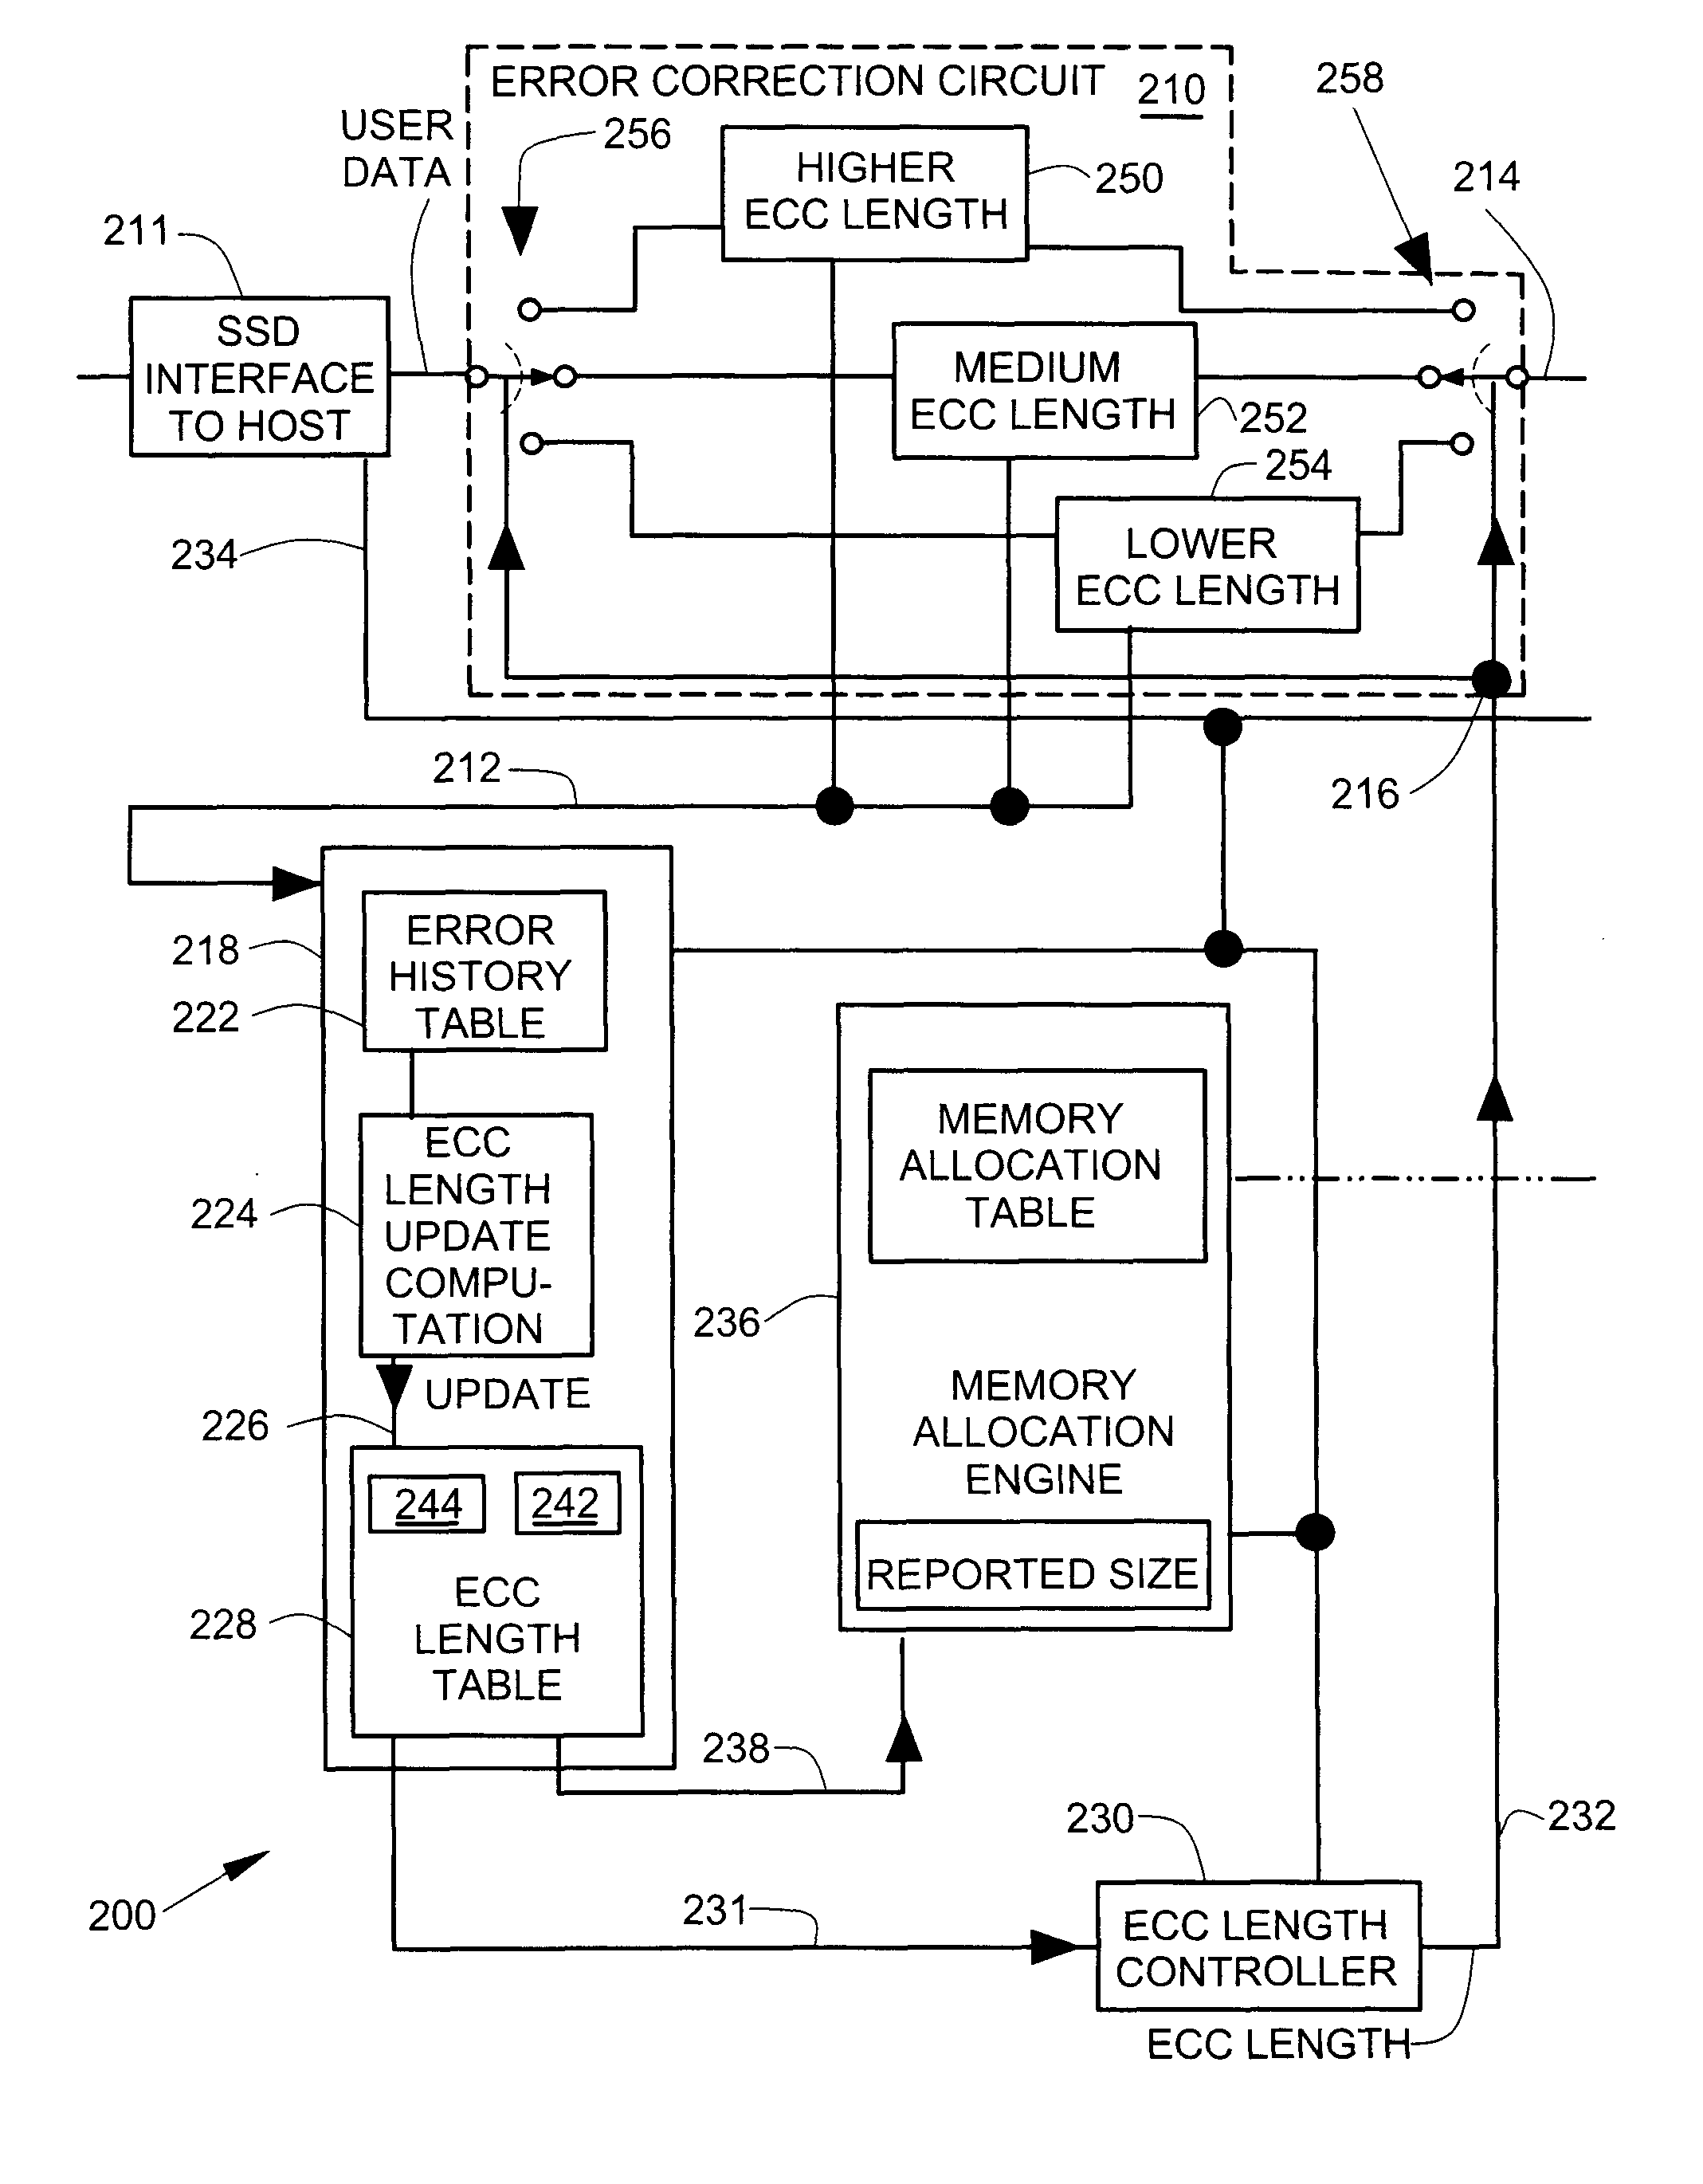 Adjustable error correction code length in an electrical storage device